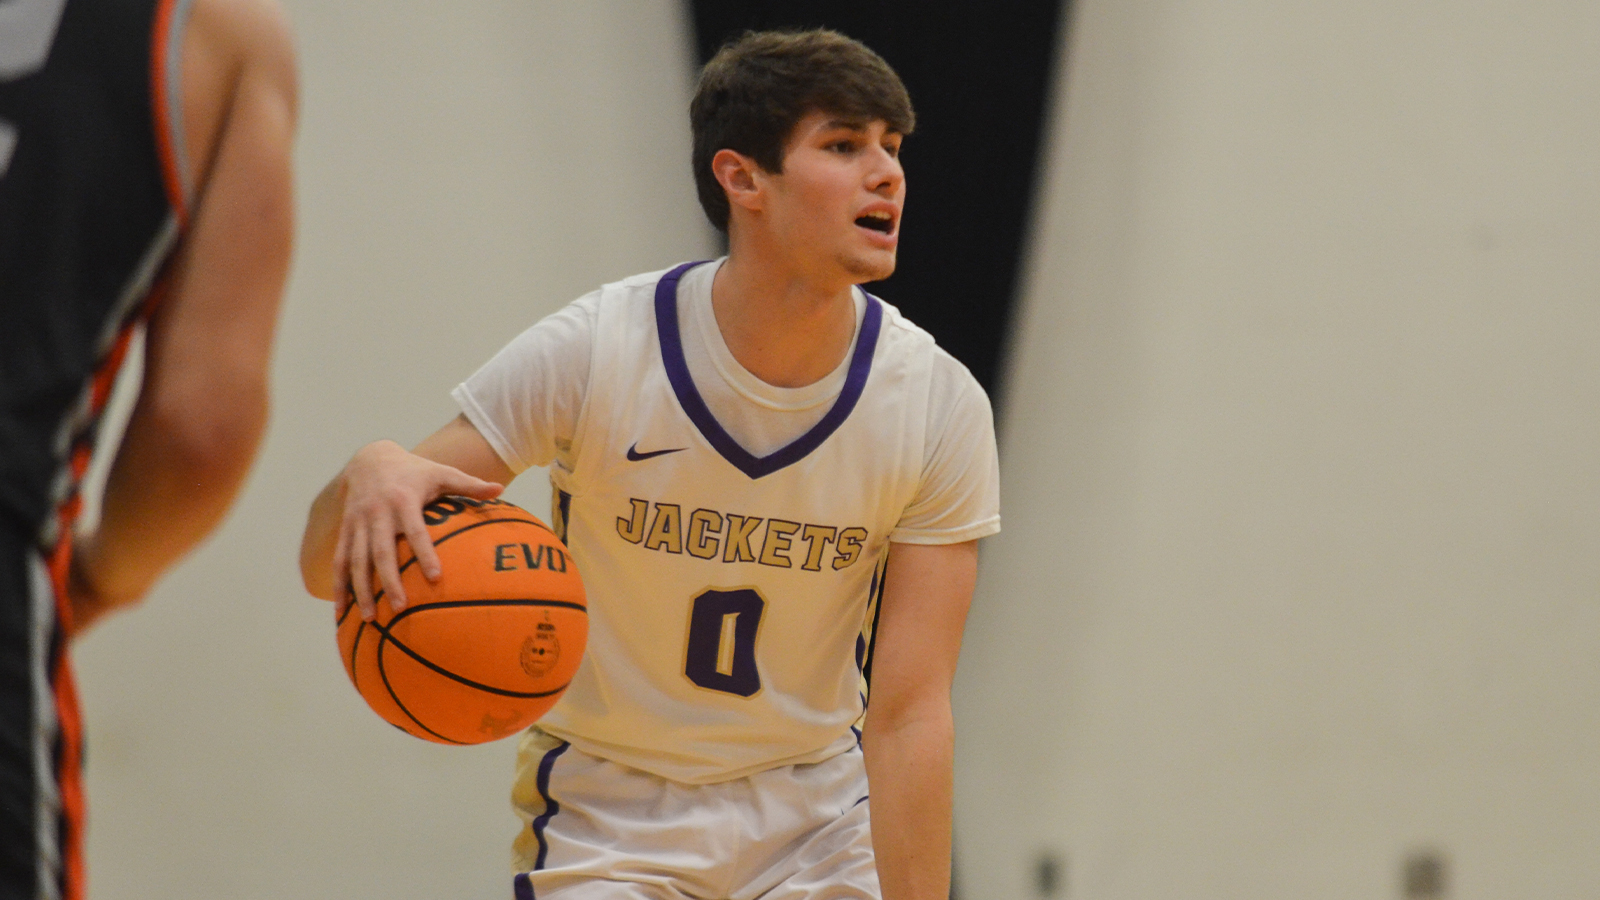 MBB Preview: Yellow Jackets battle Rose-Hulman in conference game on Saturday